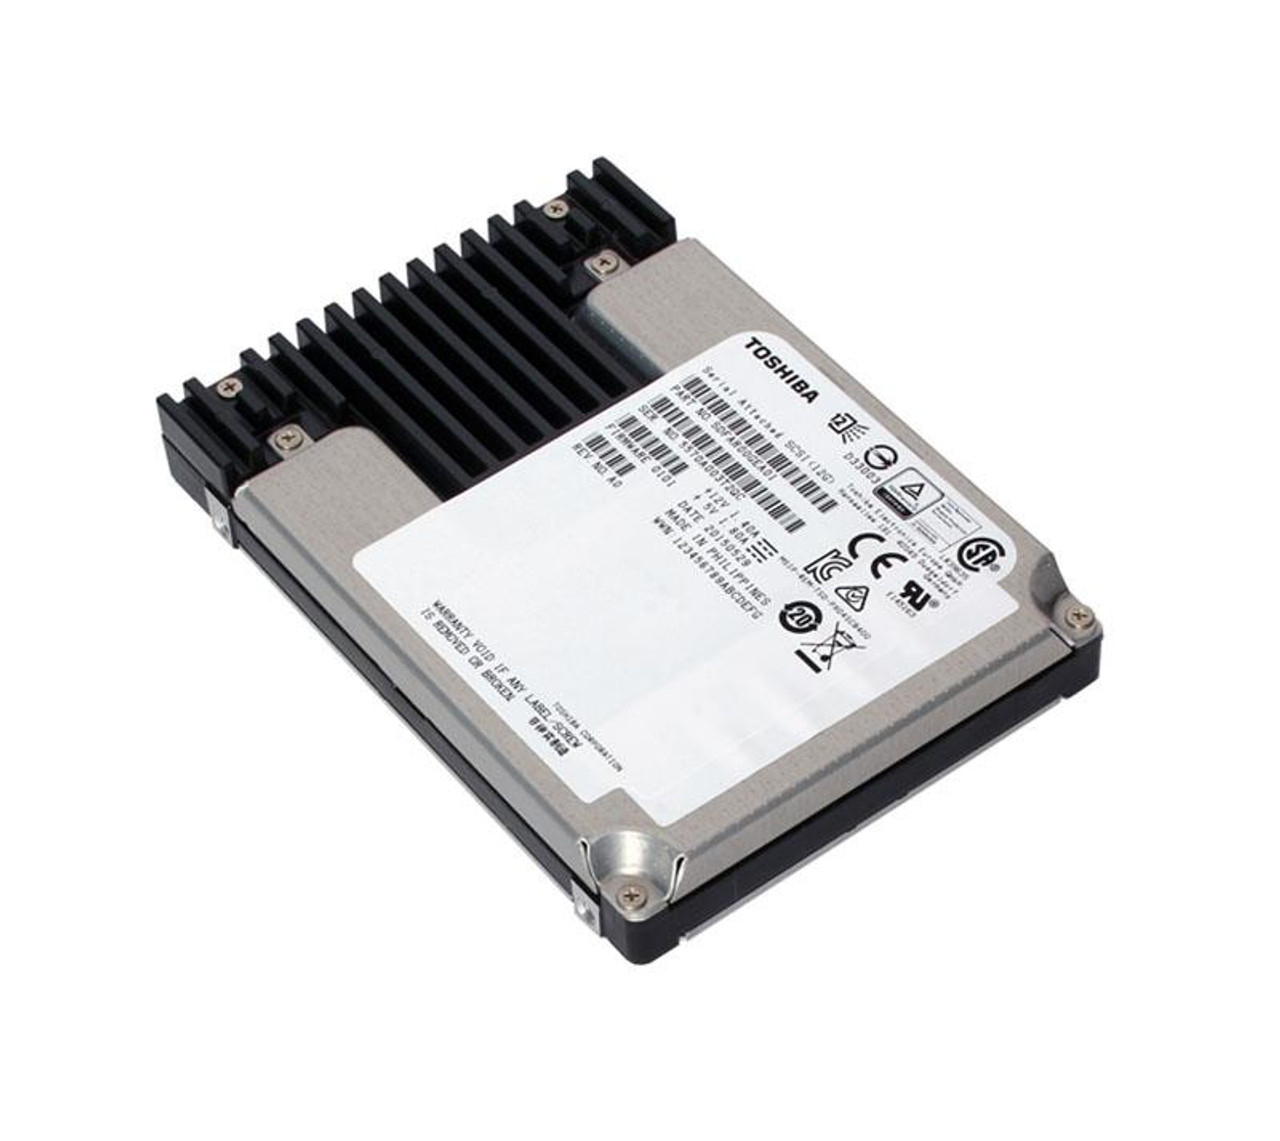 PX05SVQ384B Toshiba Enterprise 3.84TB MLC SAS 12Gbps Mixed Use (SED FIPS 140-2 / PLP) 2.5-inch Internal Solid State Drive (SSD)